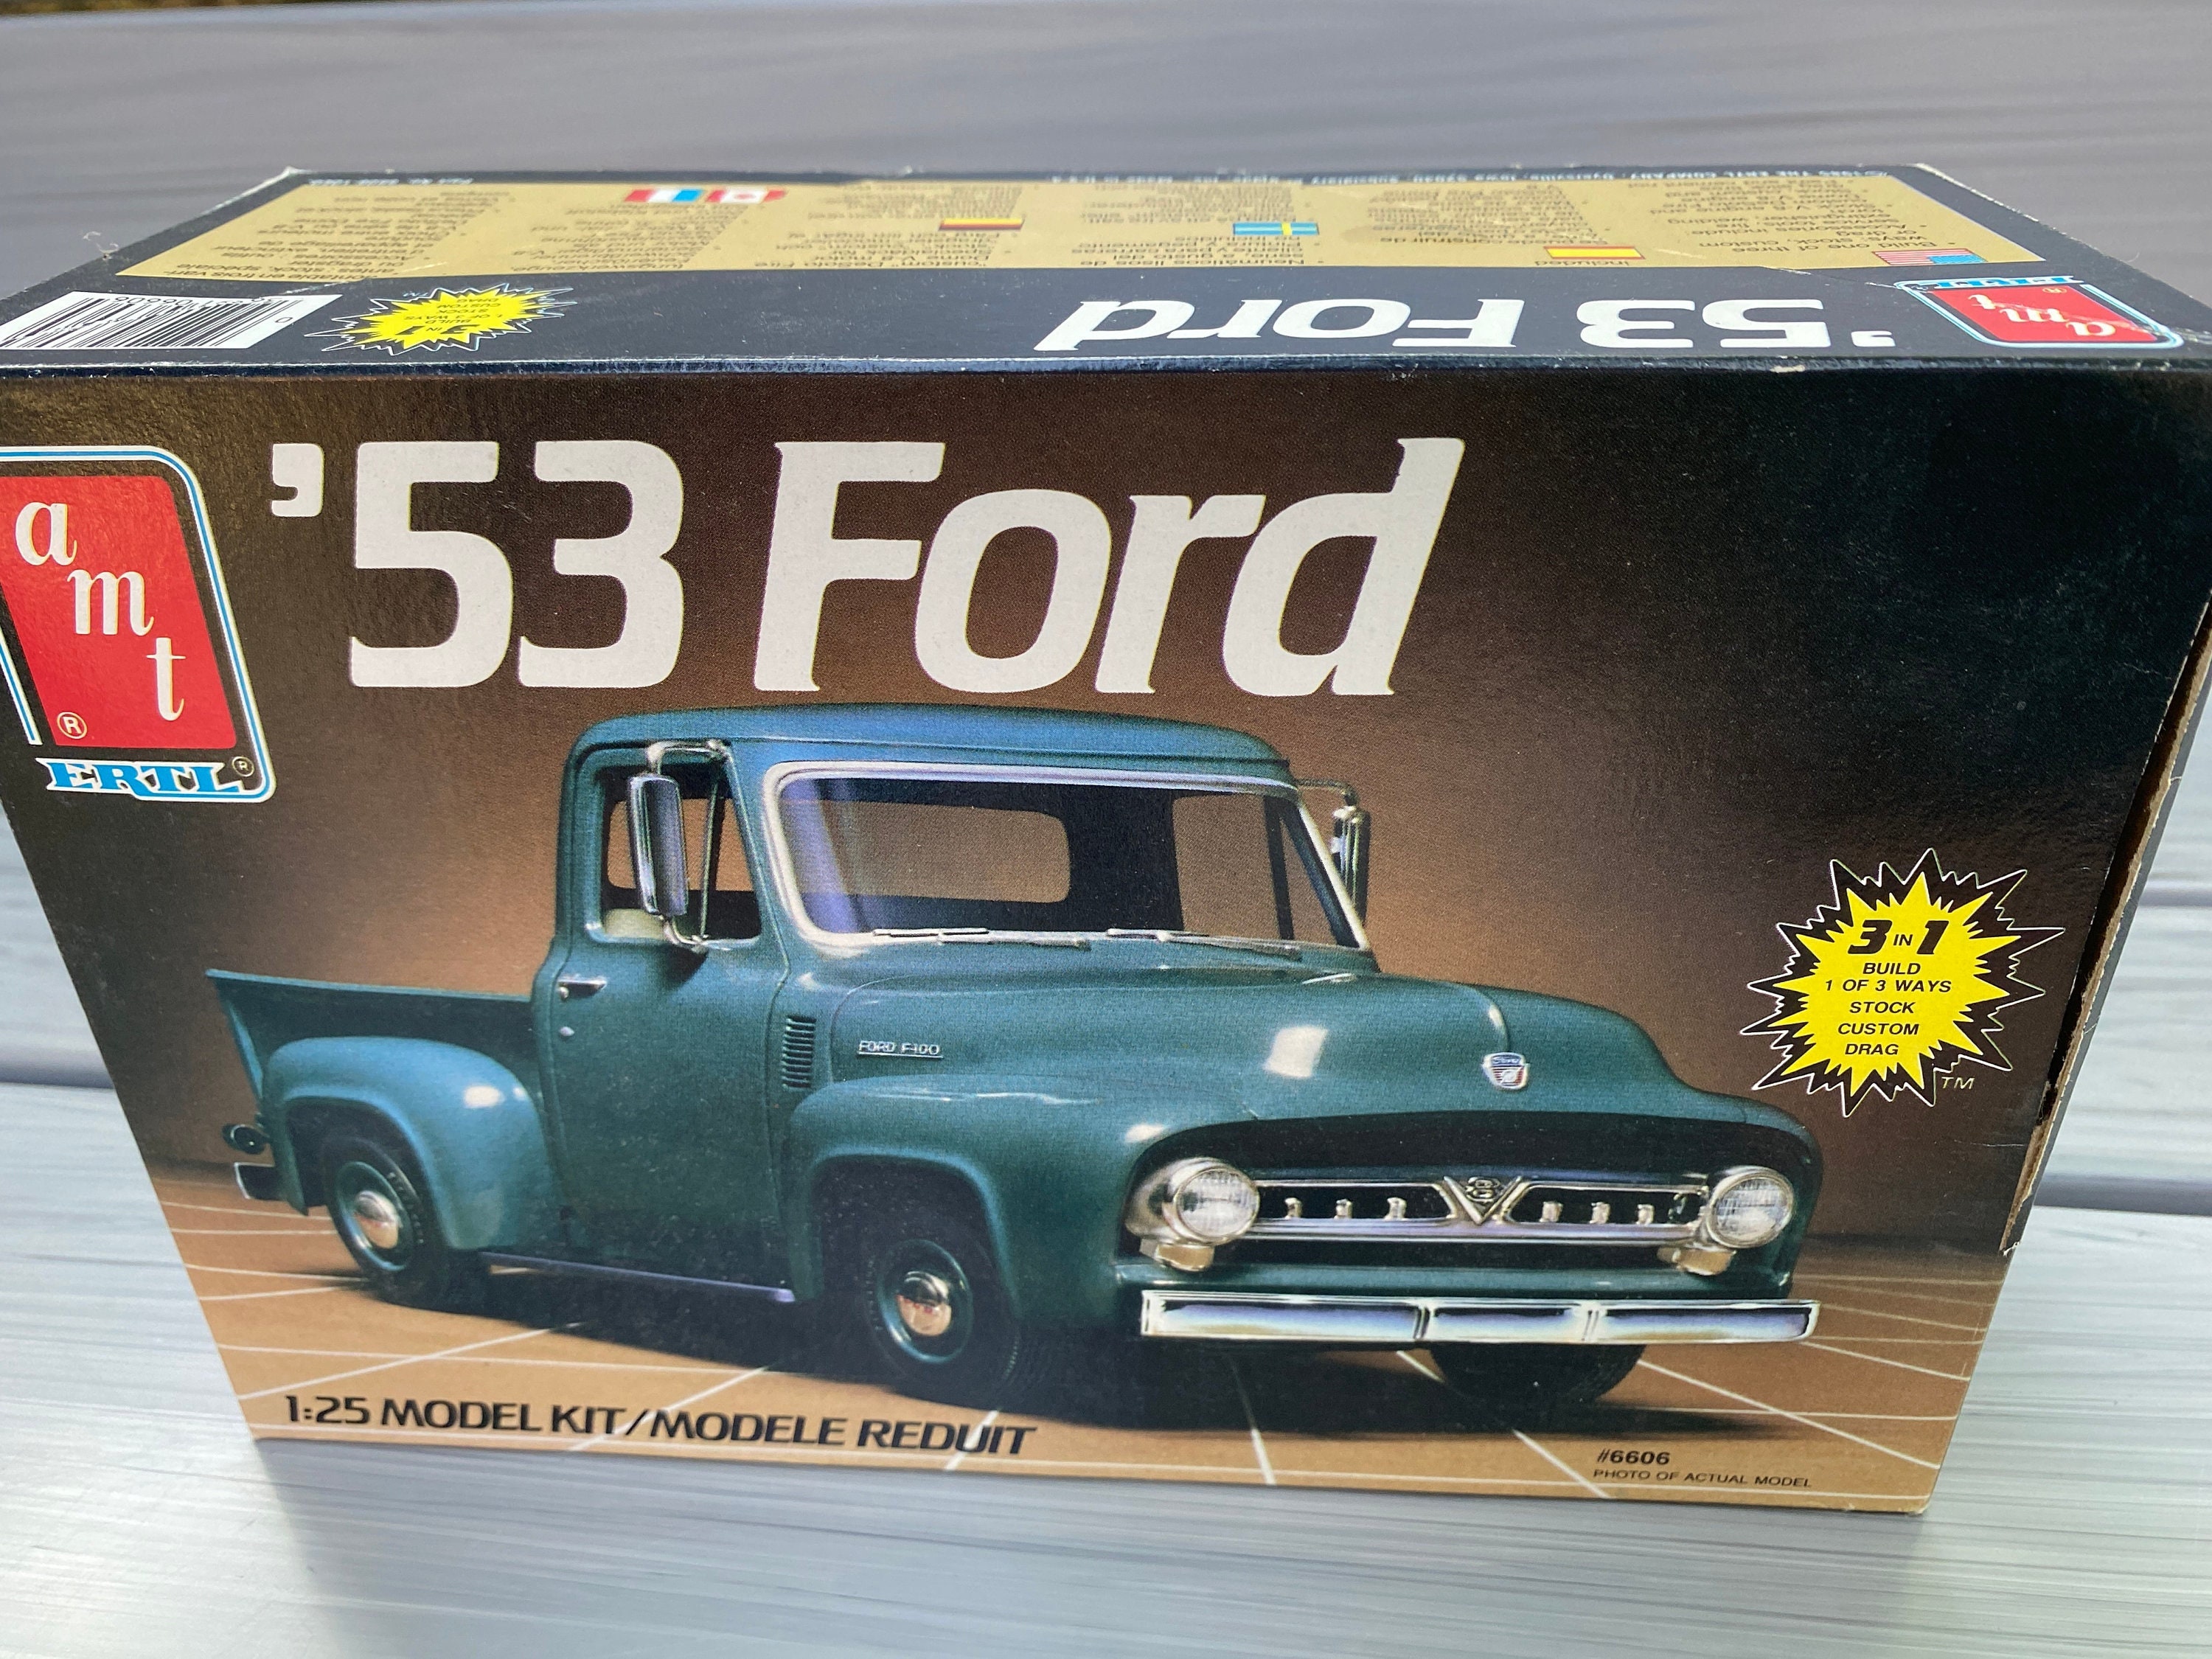  Model Truck Kits To Build